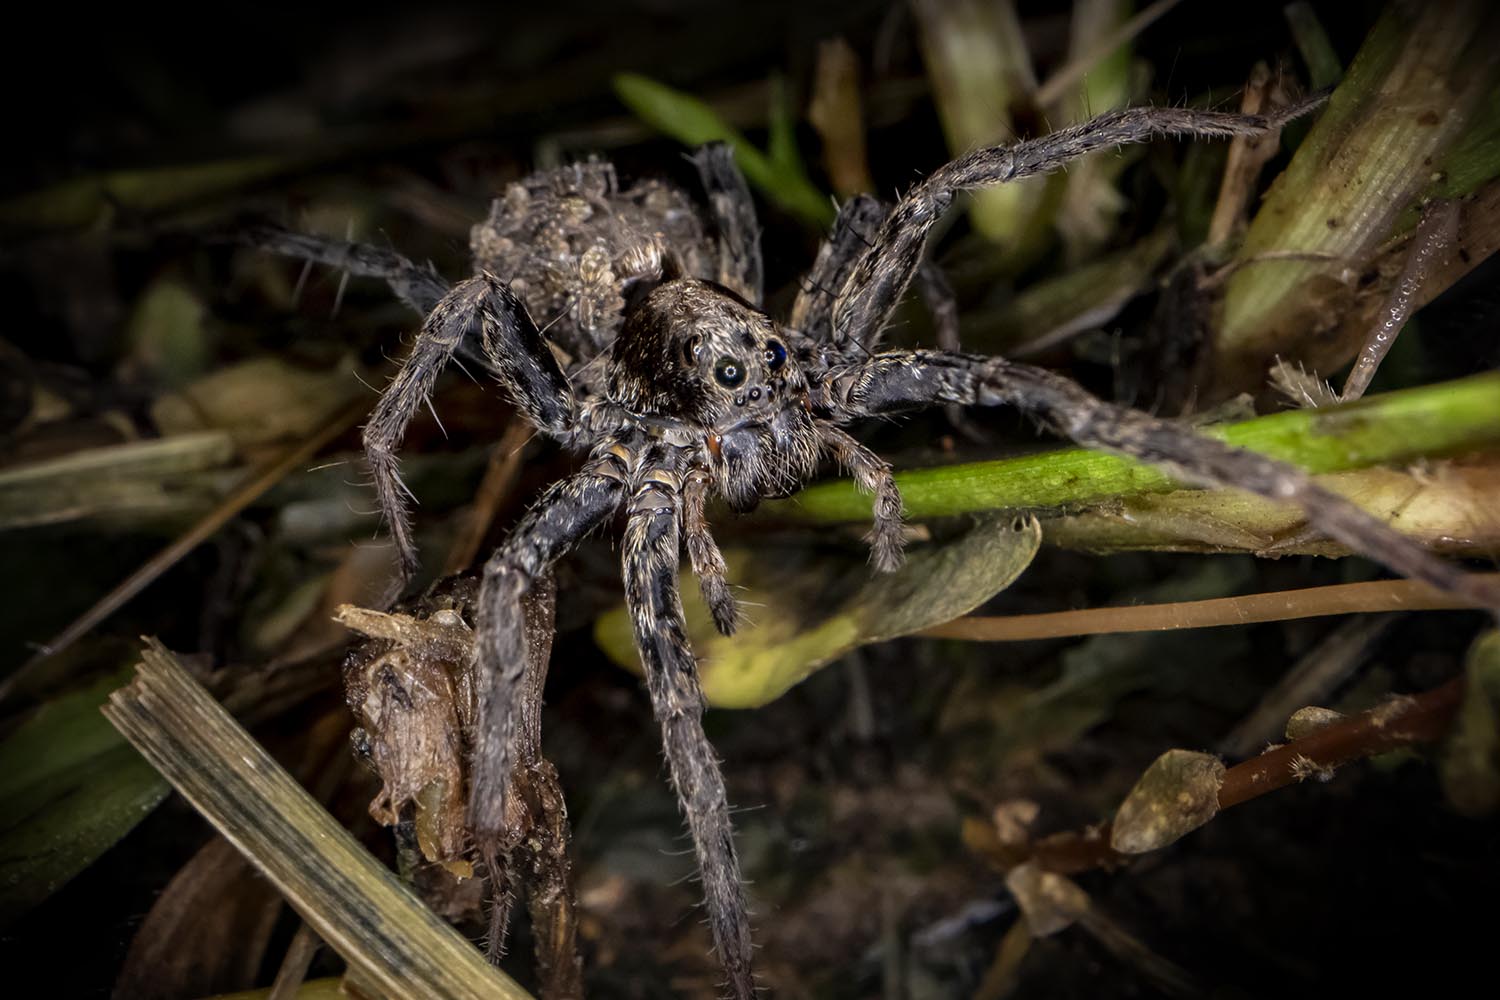 A large, hairy spider, with a face that resembles Sasquatch, crawling through the grass